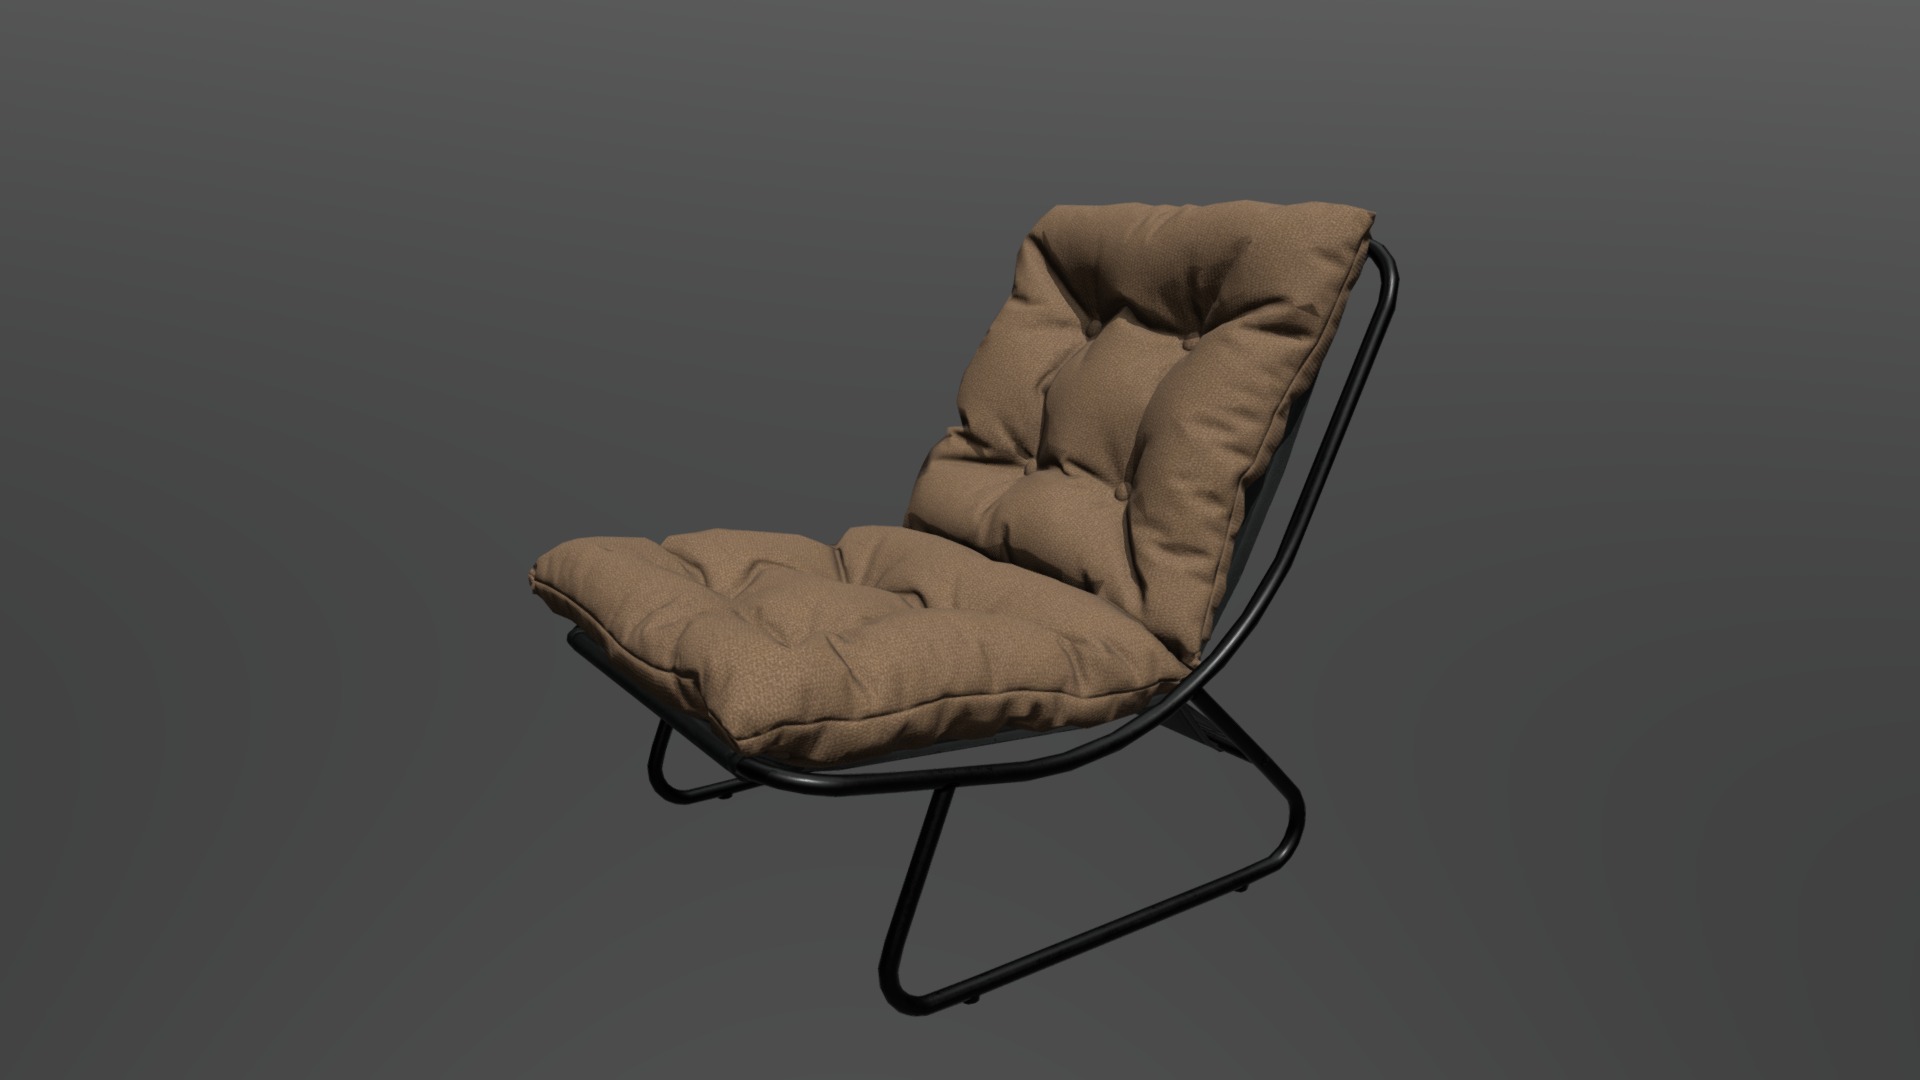 3D model PBR Chair - This is a 3D model of the PBR Chair. The 3D model is about a chair with a cushion.